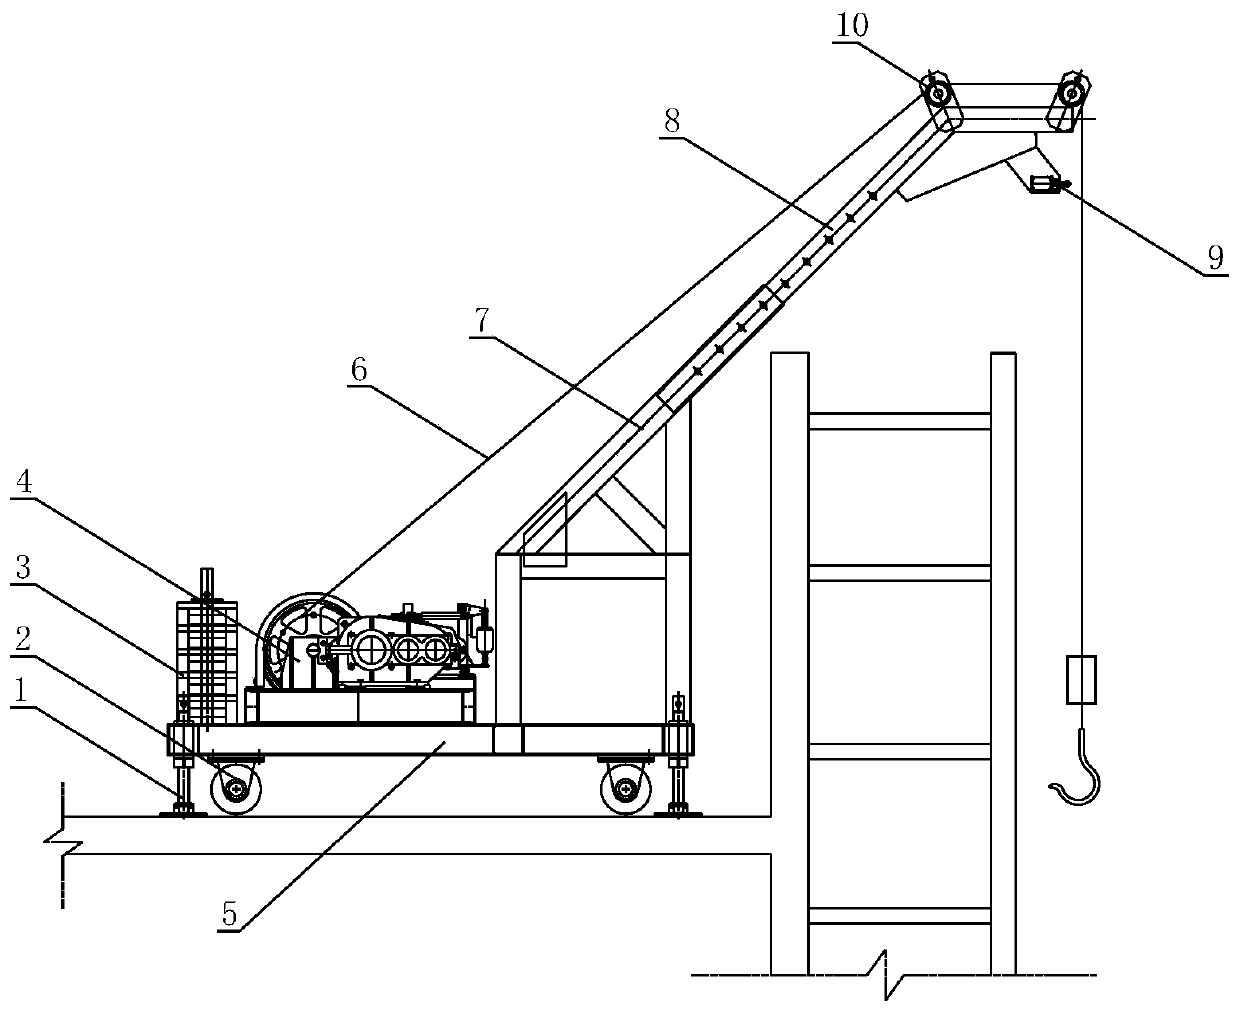 Construction method of mechanical lifting device